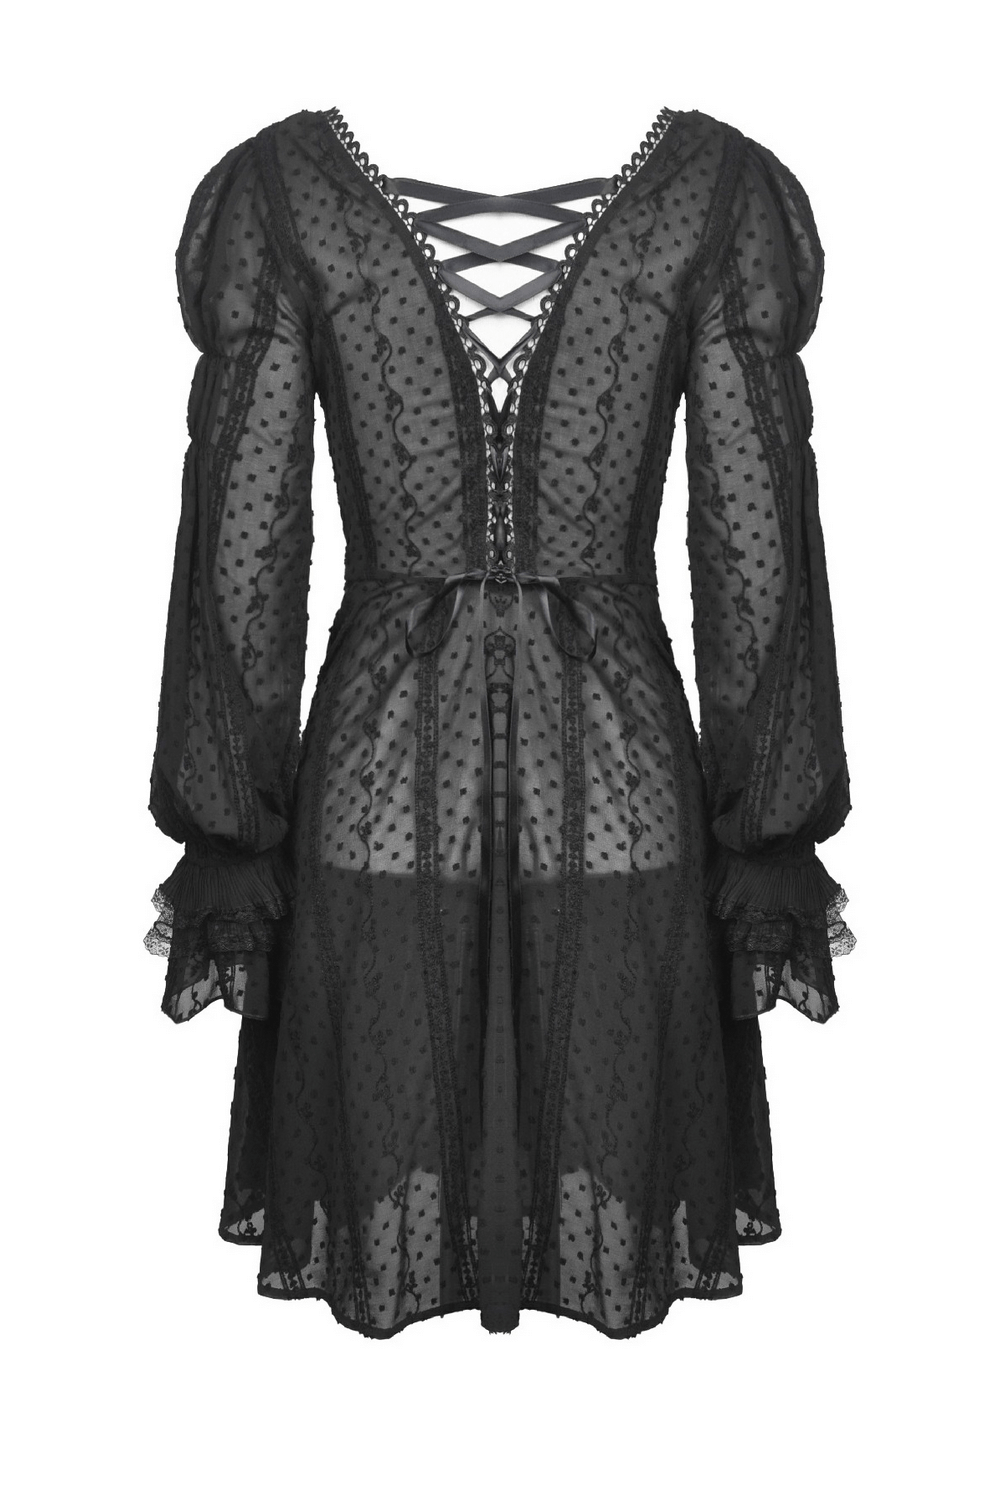 Gothic Lolita Thin Coat with Frilly Beads and Buttons